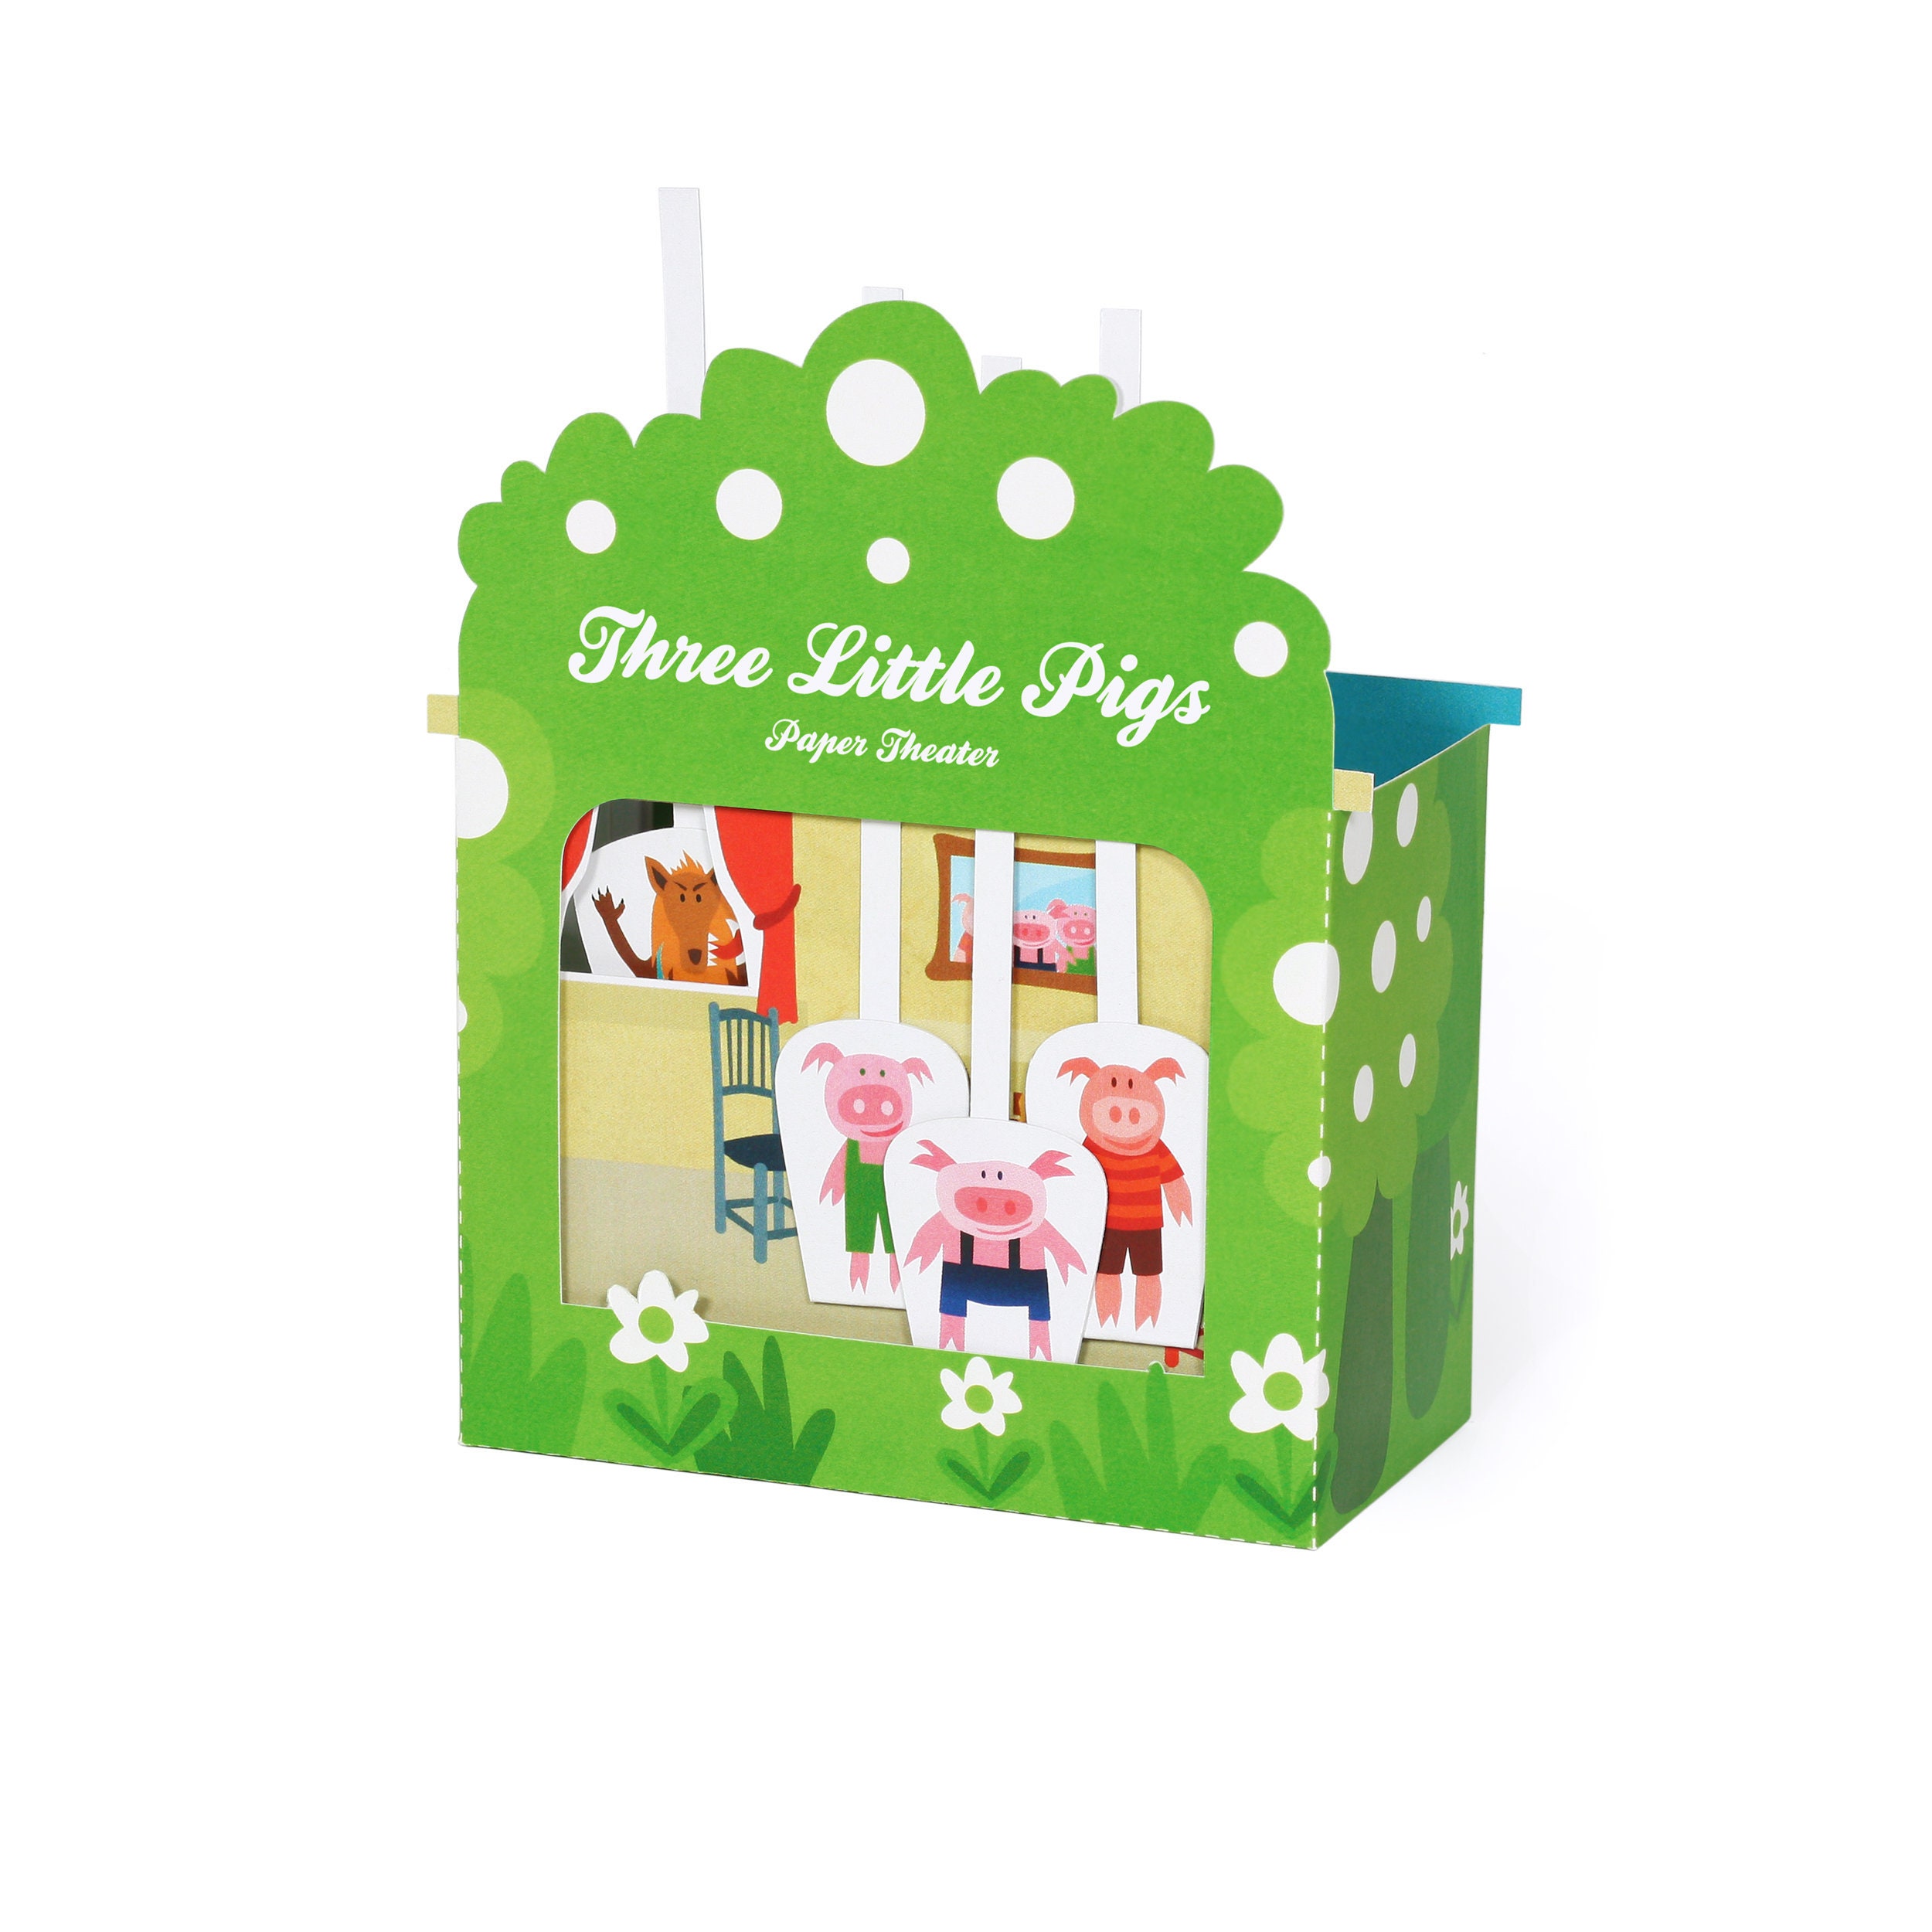 Three Little Pigs Paper Theater Diy Paper Craft Kit Paper Etsy